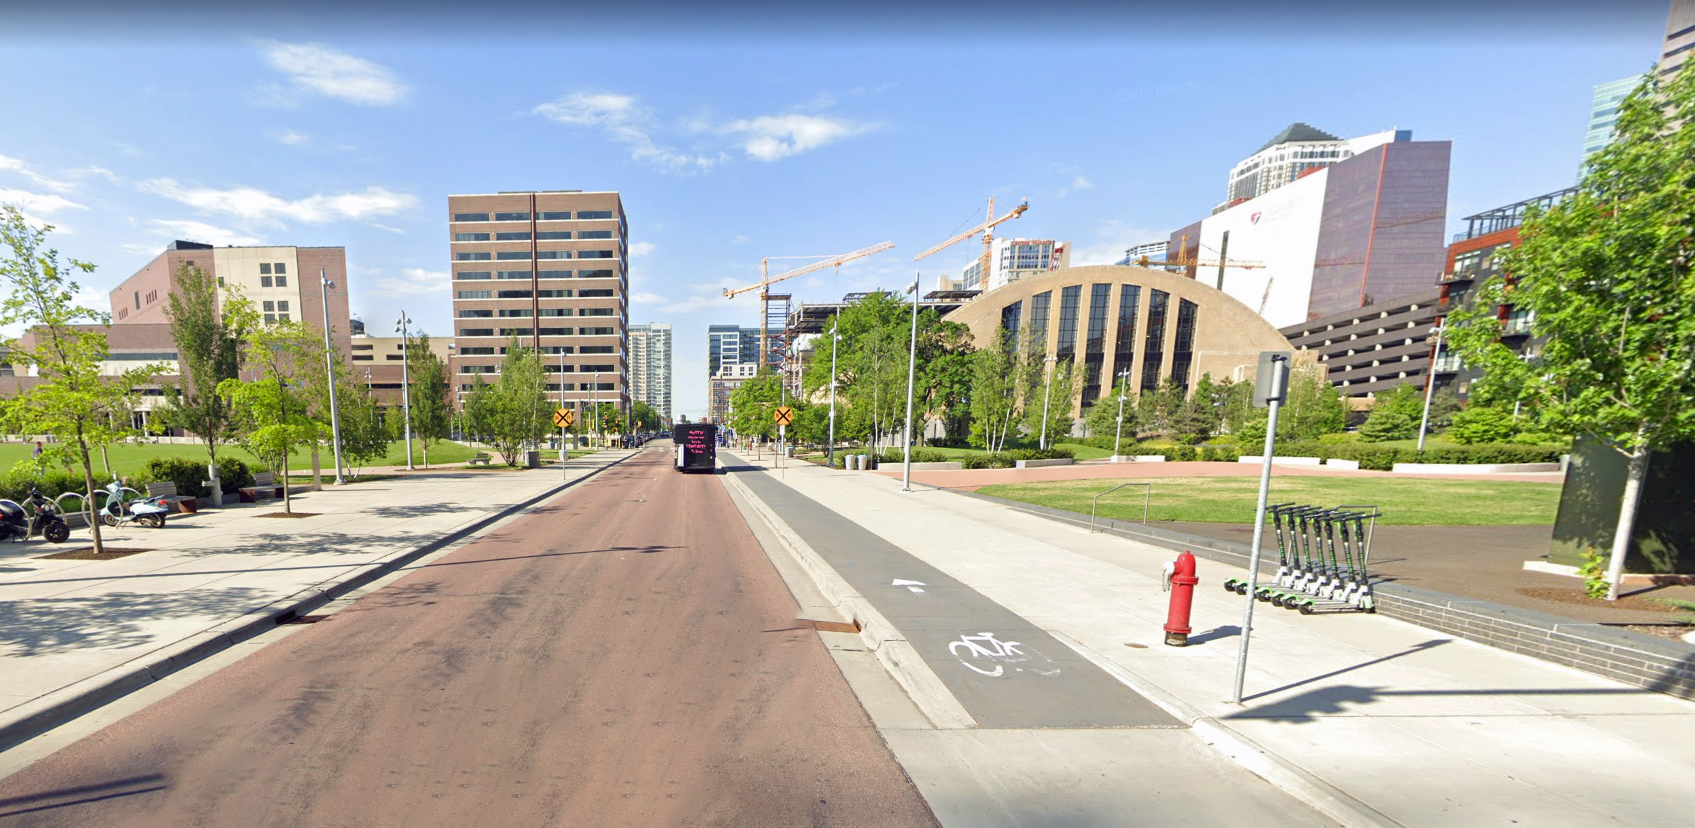 Protected bikeway and enhanced pedestrian realm near The Commons Park